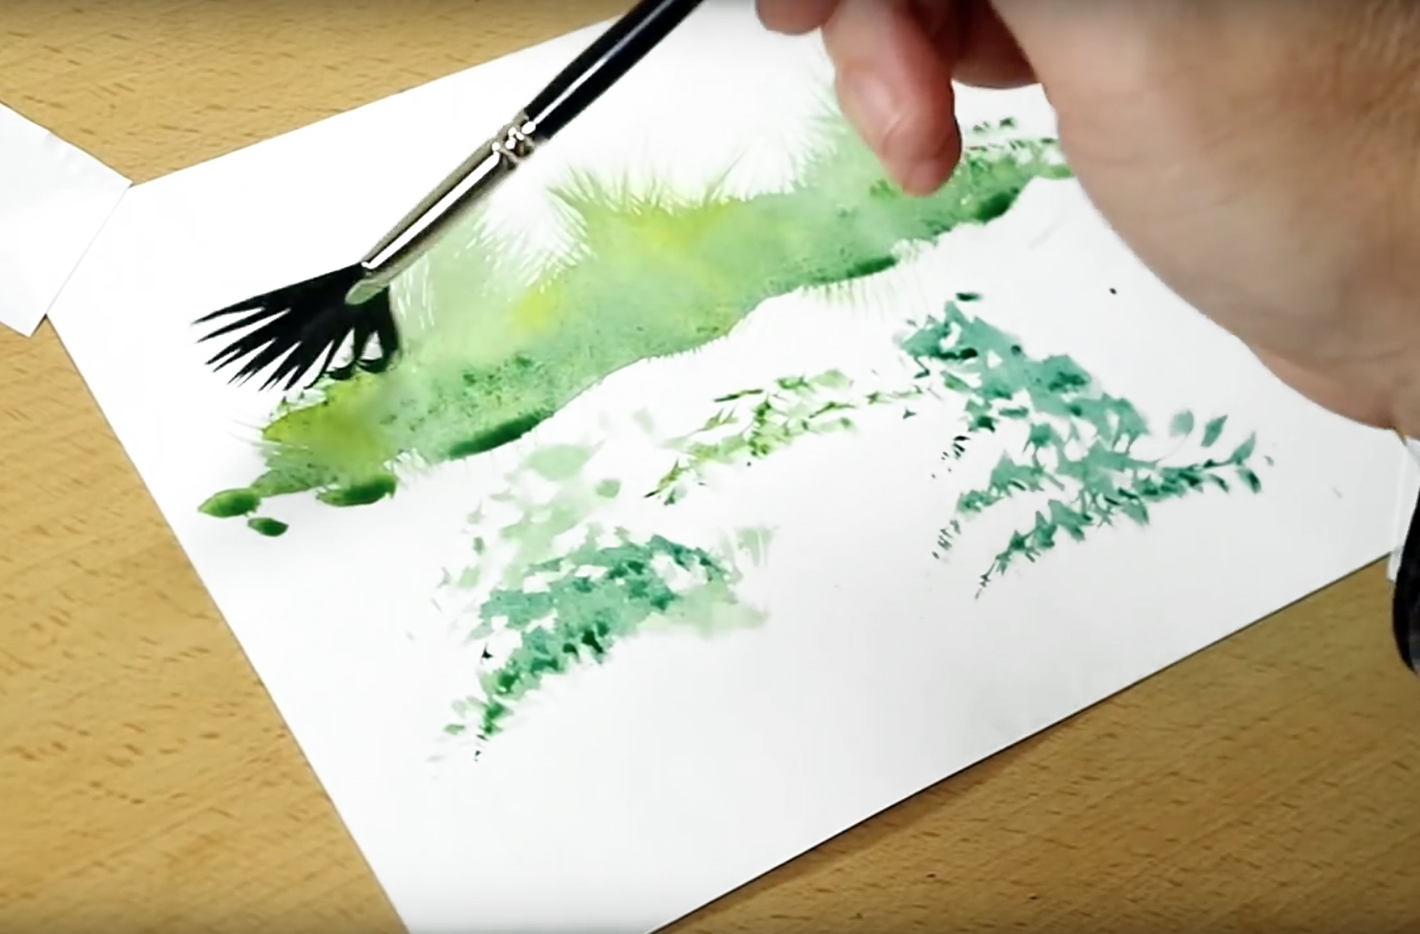 4 Watercolor For Painting With Fan Brush - Beebly's